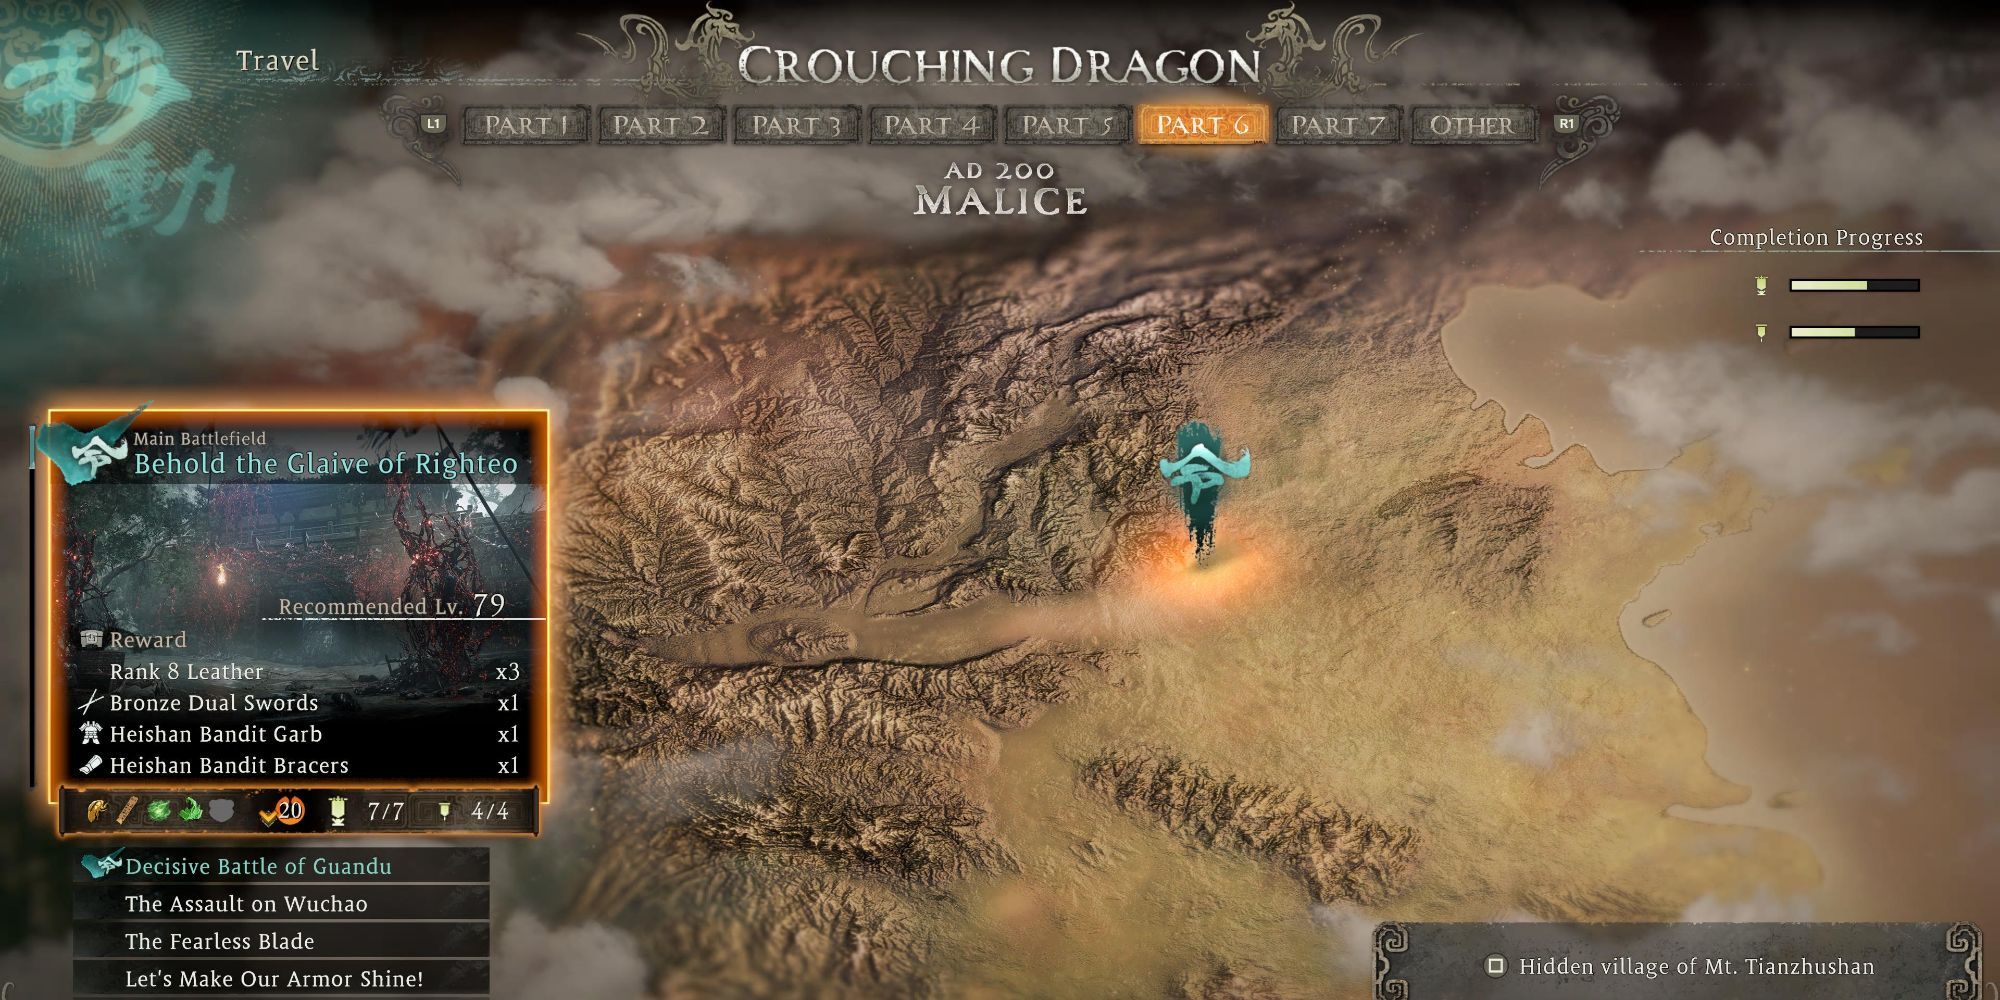 Wo Long: Fallen Dynasty - map mission screen showing missed collectables